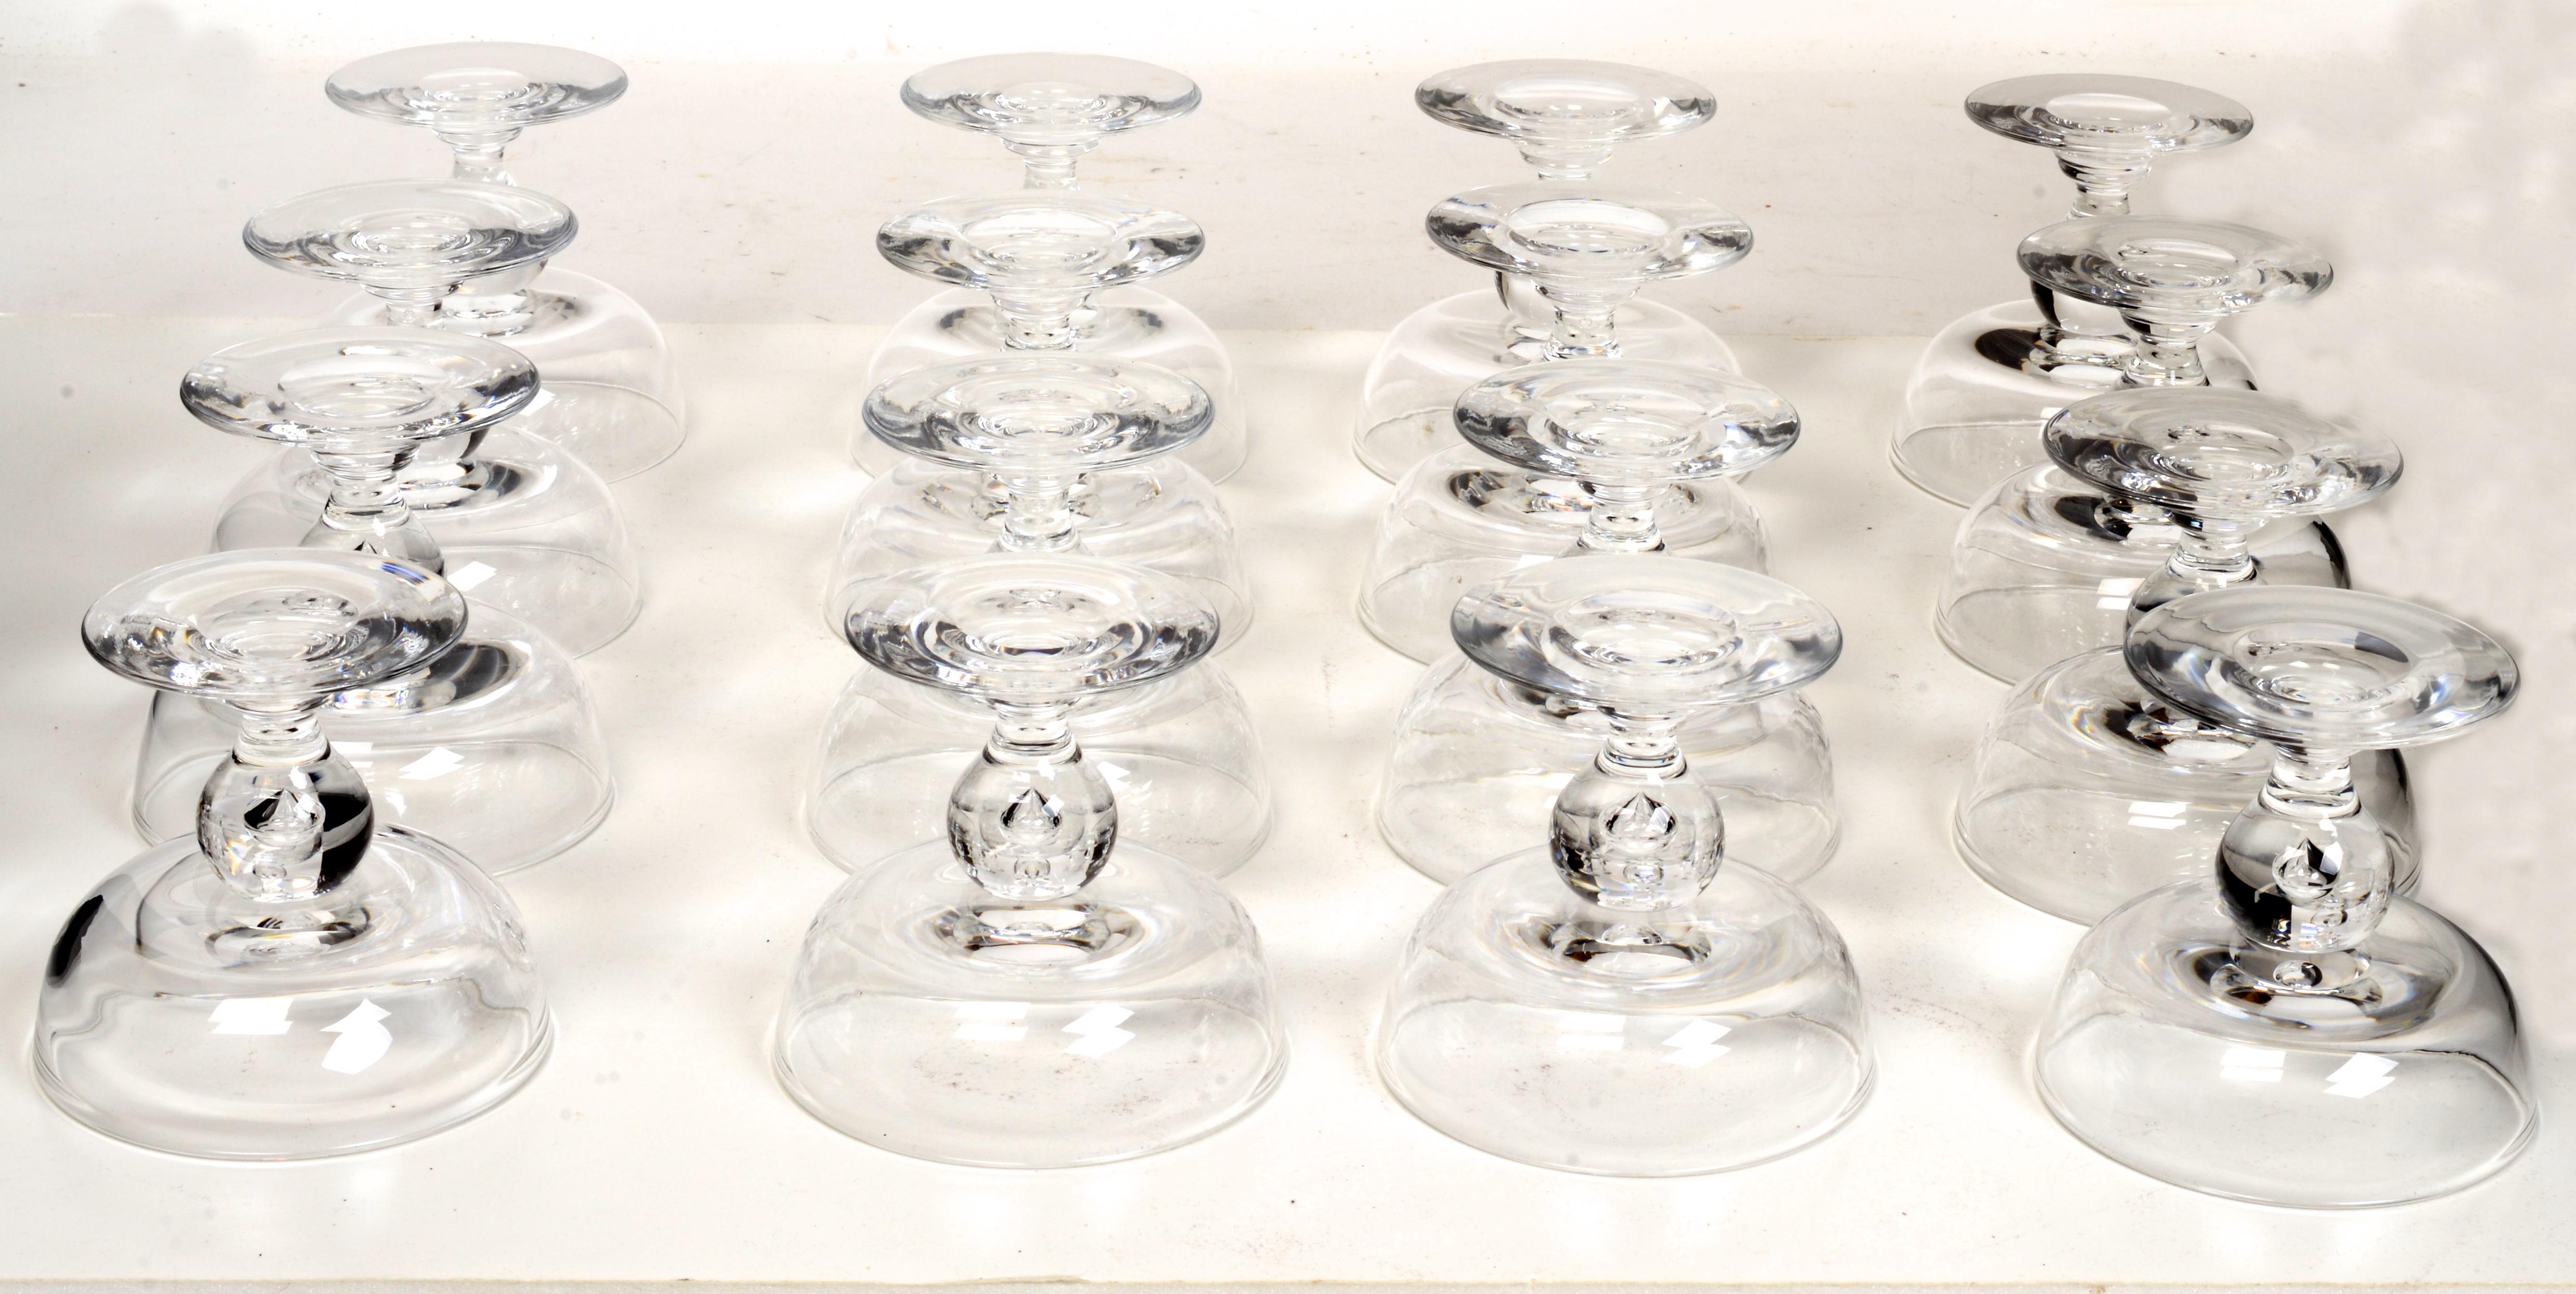 Set of 16 George Thompson Designed Steuben Champagne/Coupe/Tall Sherbet Glasses In Excellent Condition For Sale In valatie, NY